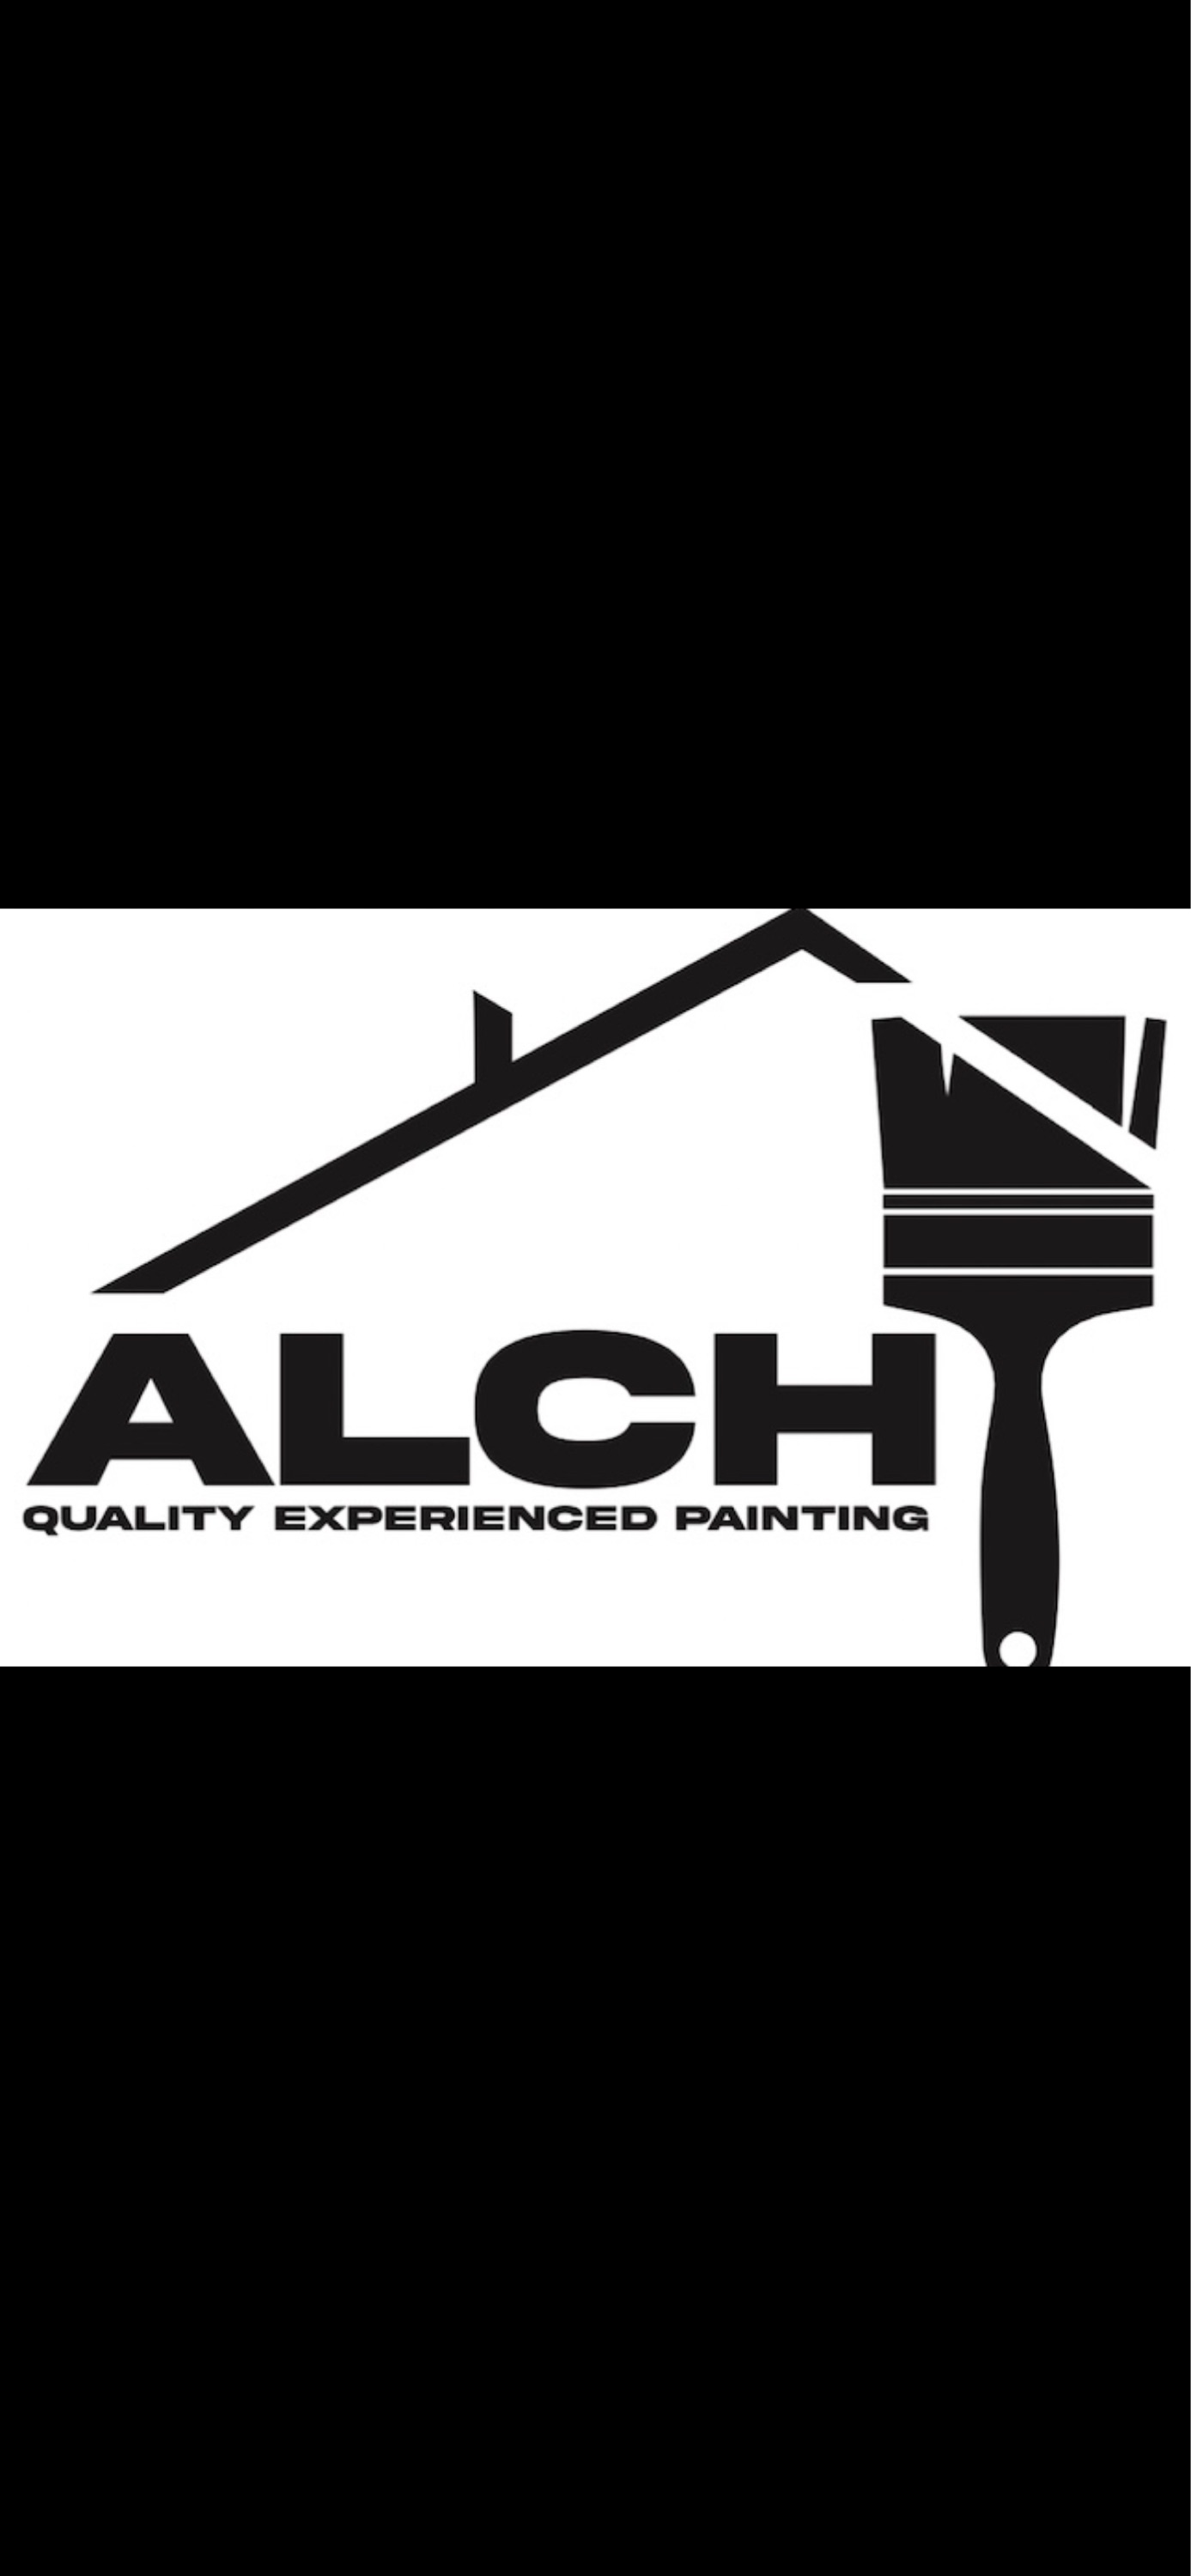 ALCH Quality Experienced Painting LLC Logo